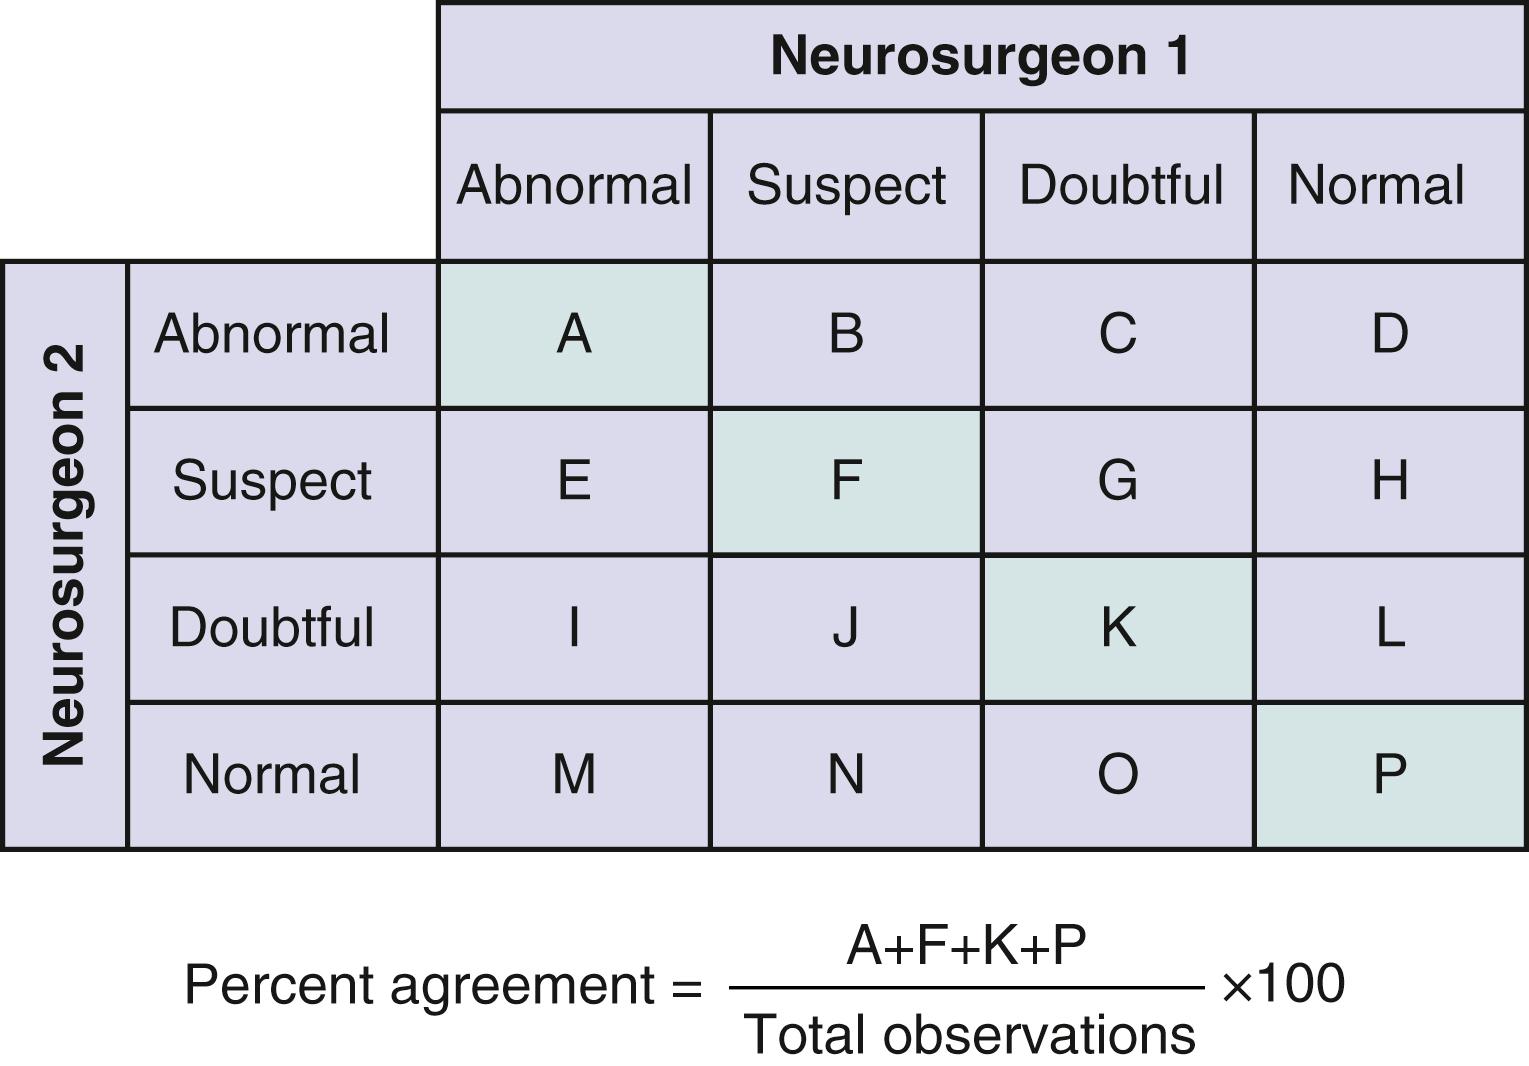 Figure 76.6, Calculating percent agreement between two neurosurgeons who are asked to label a finding as abnormal, suspected abnormal, doubtful abnormal, or normal.